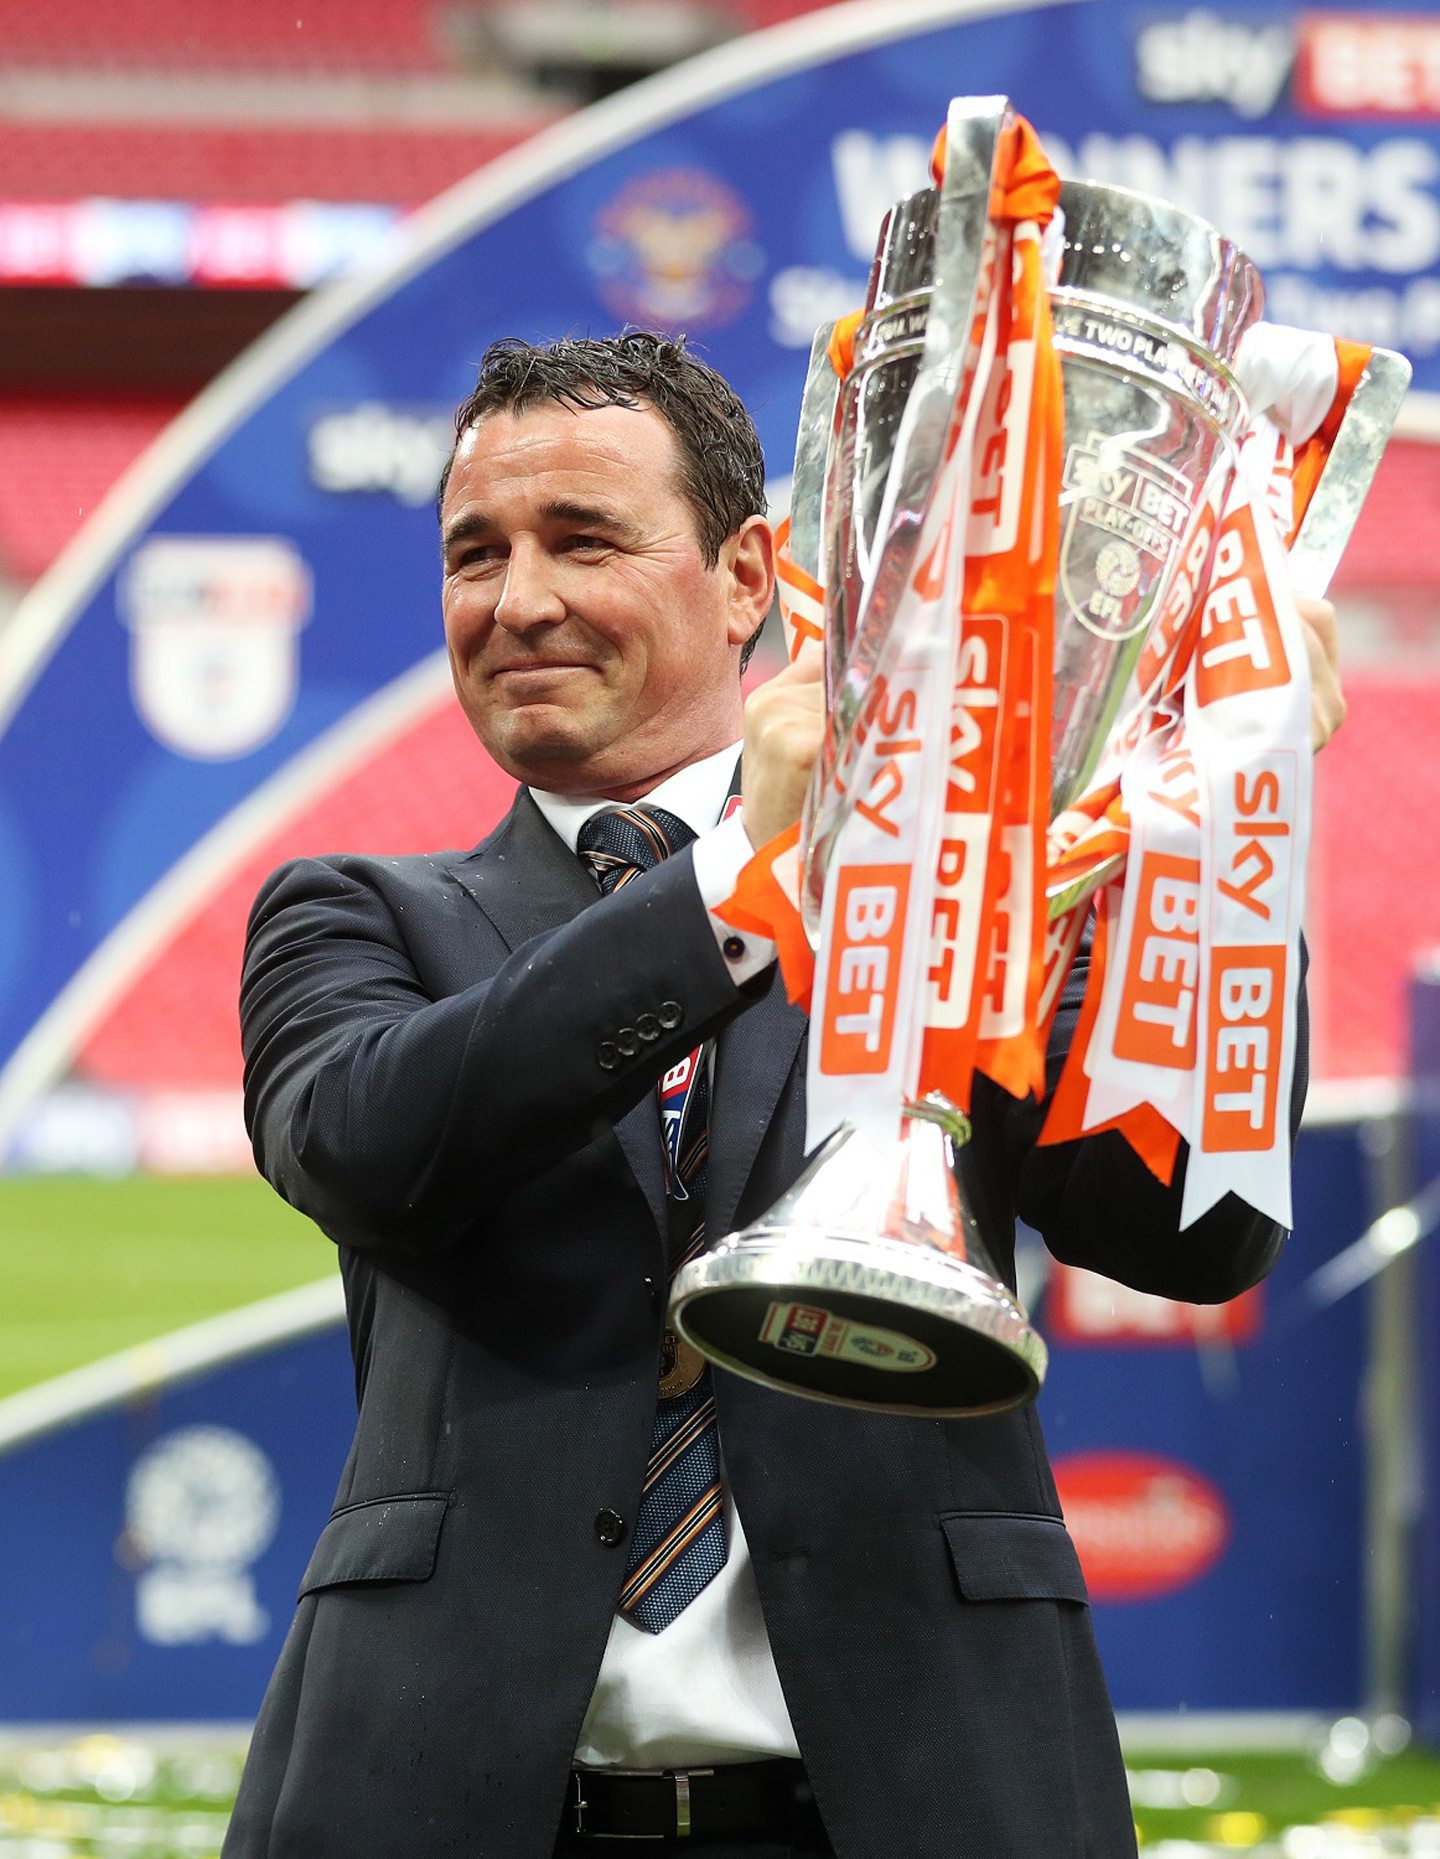 Gary Bowyer oversaw Blackpool's promotion to League One in 2017.